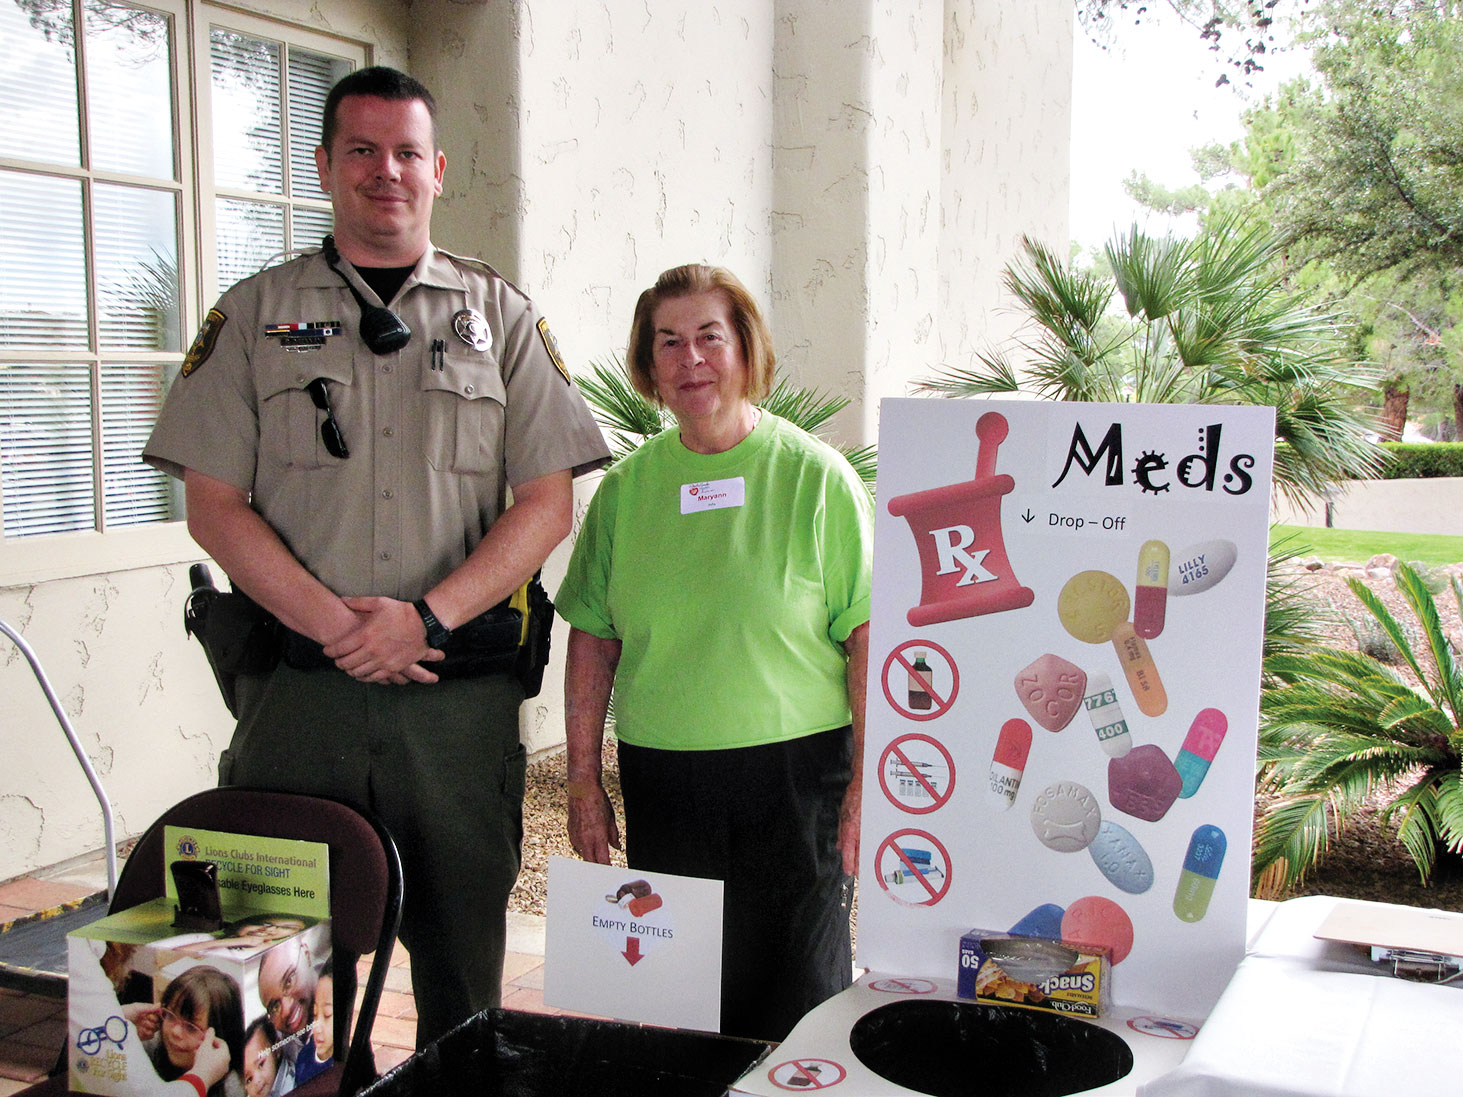 Bring expired meds and old eyeglasses for collection at the Health Fair.